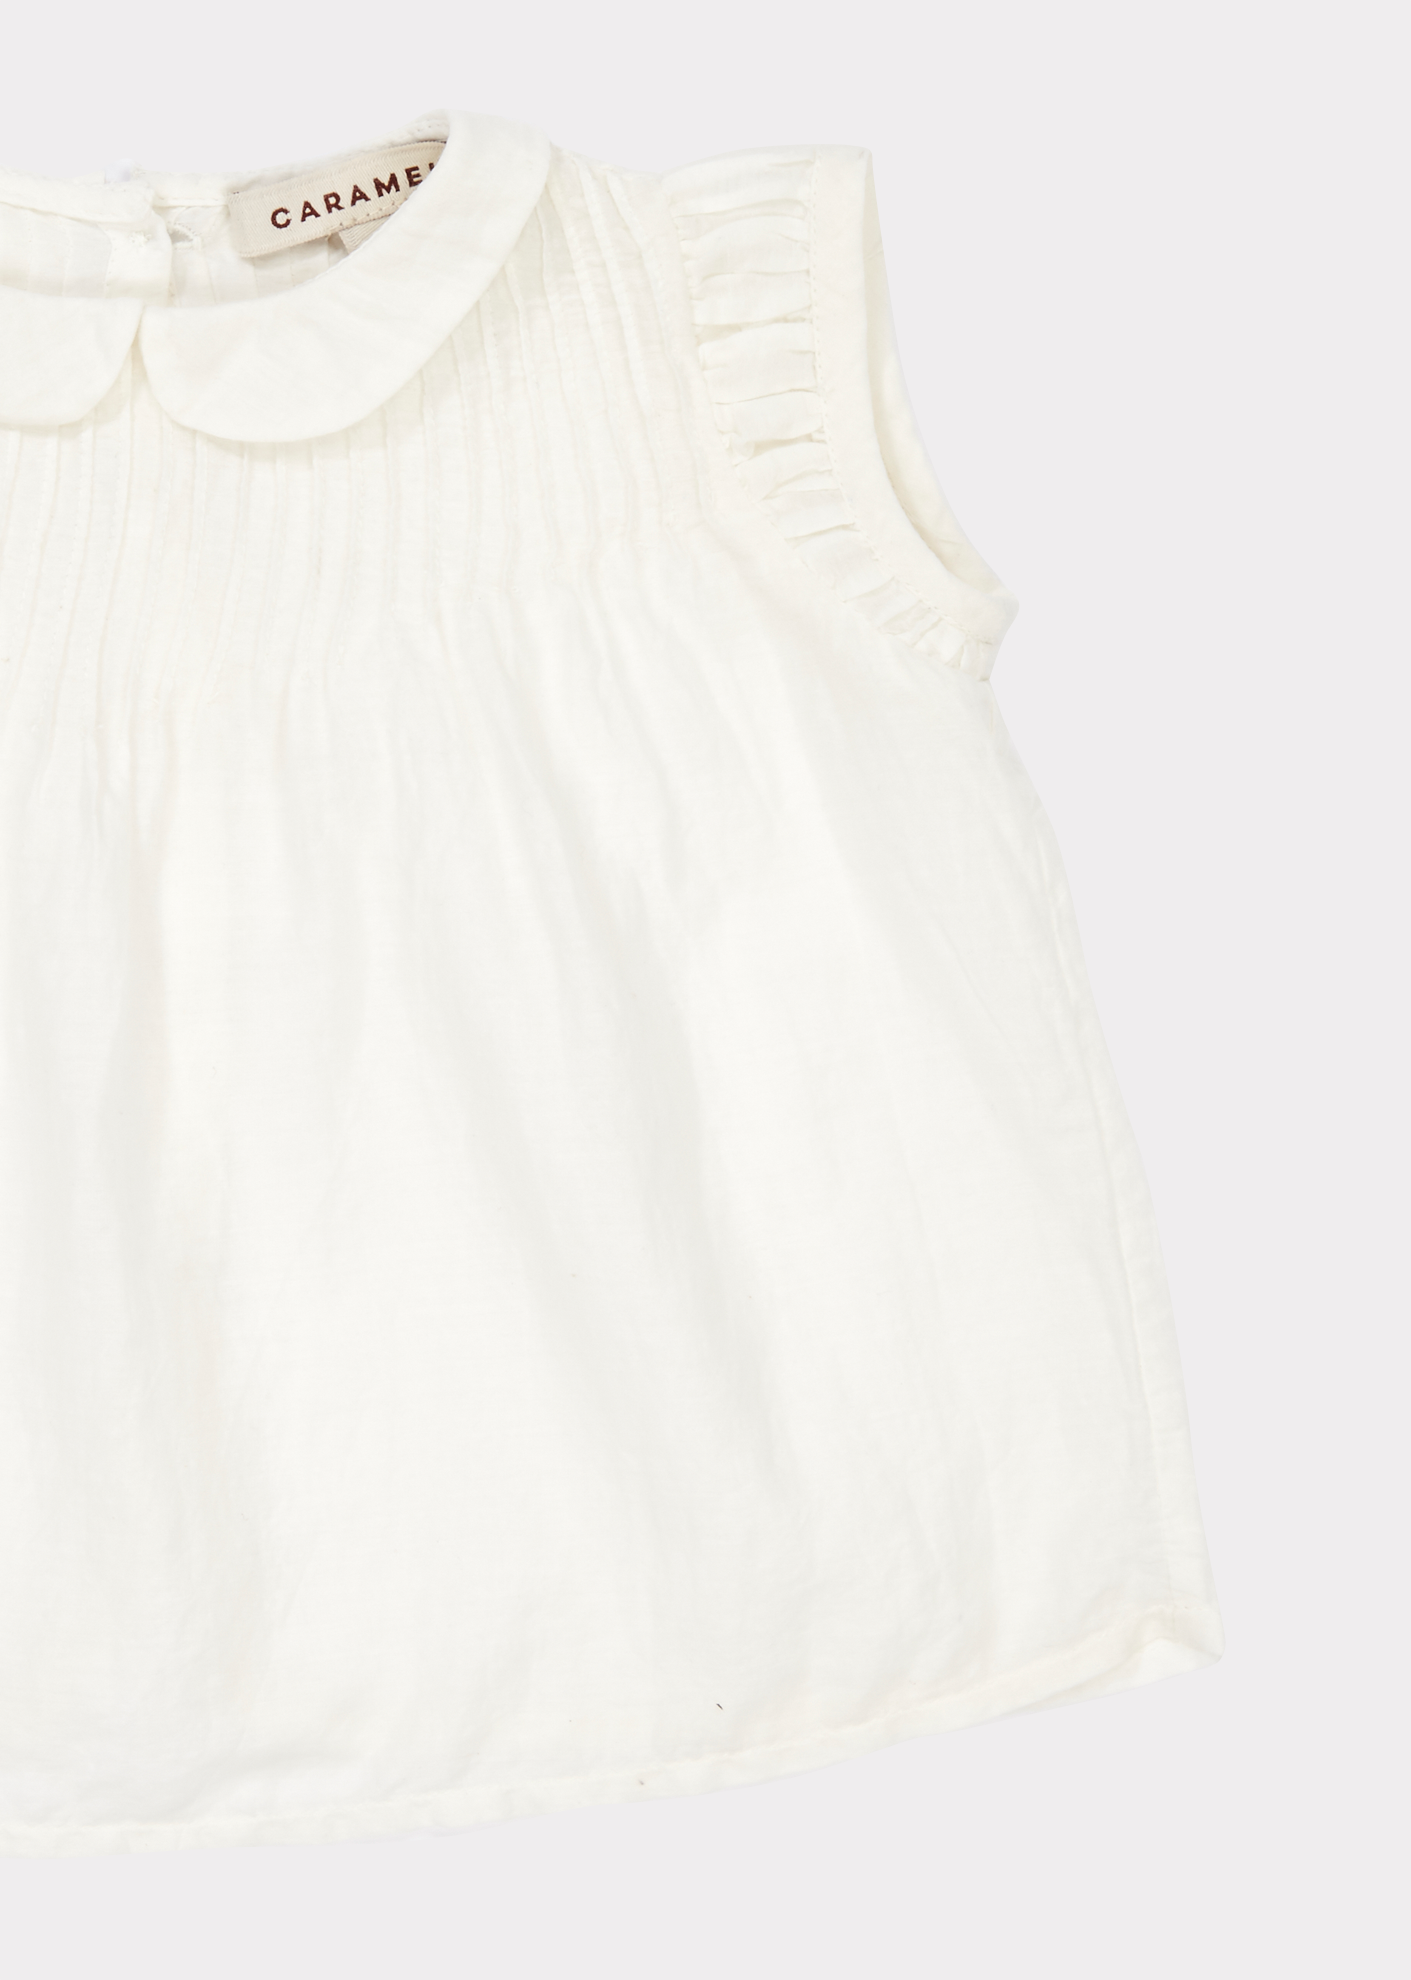 MIMOSA BABY TOP - OFF WHITE